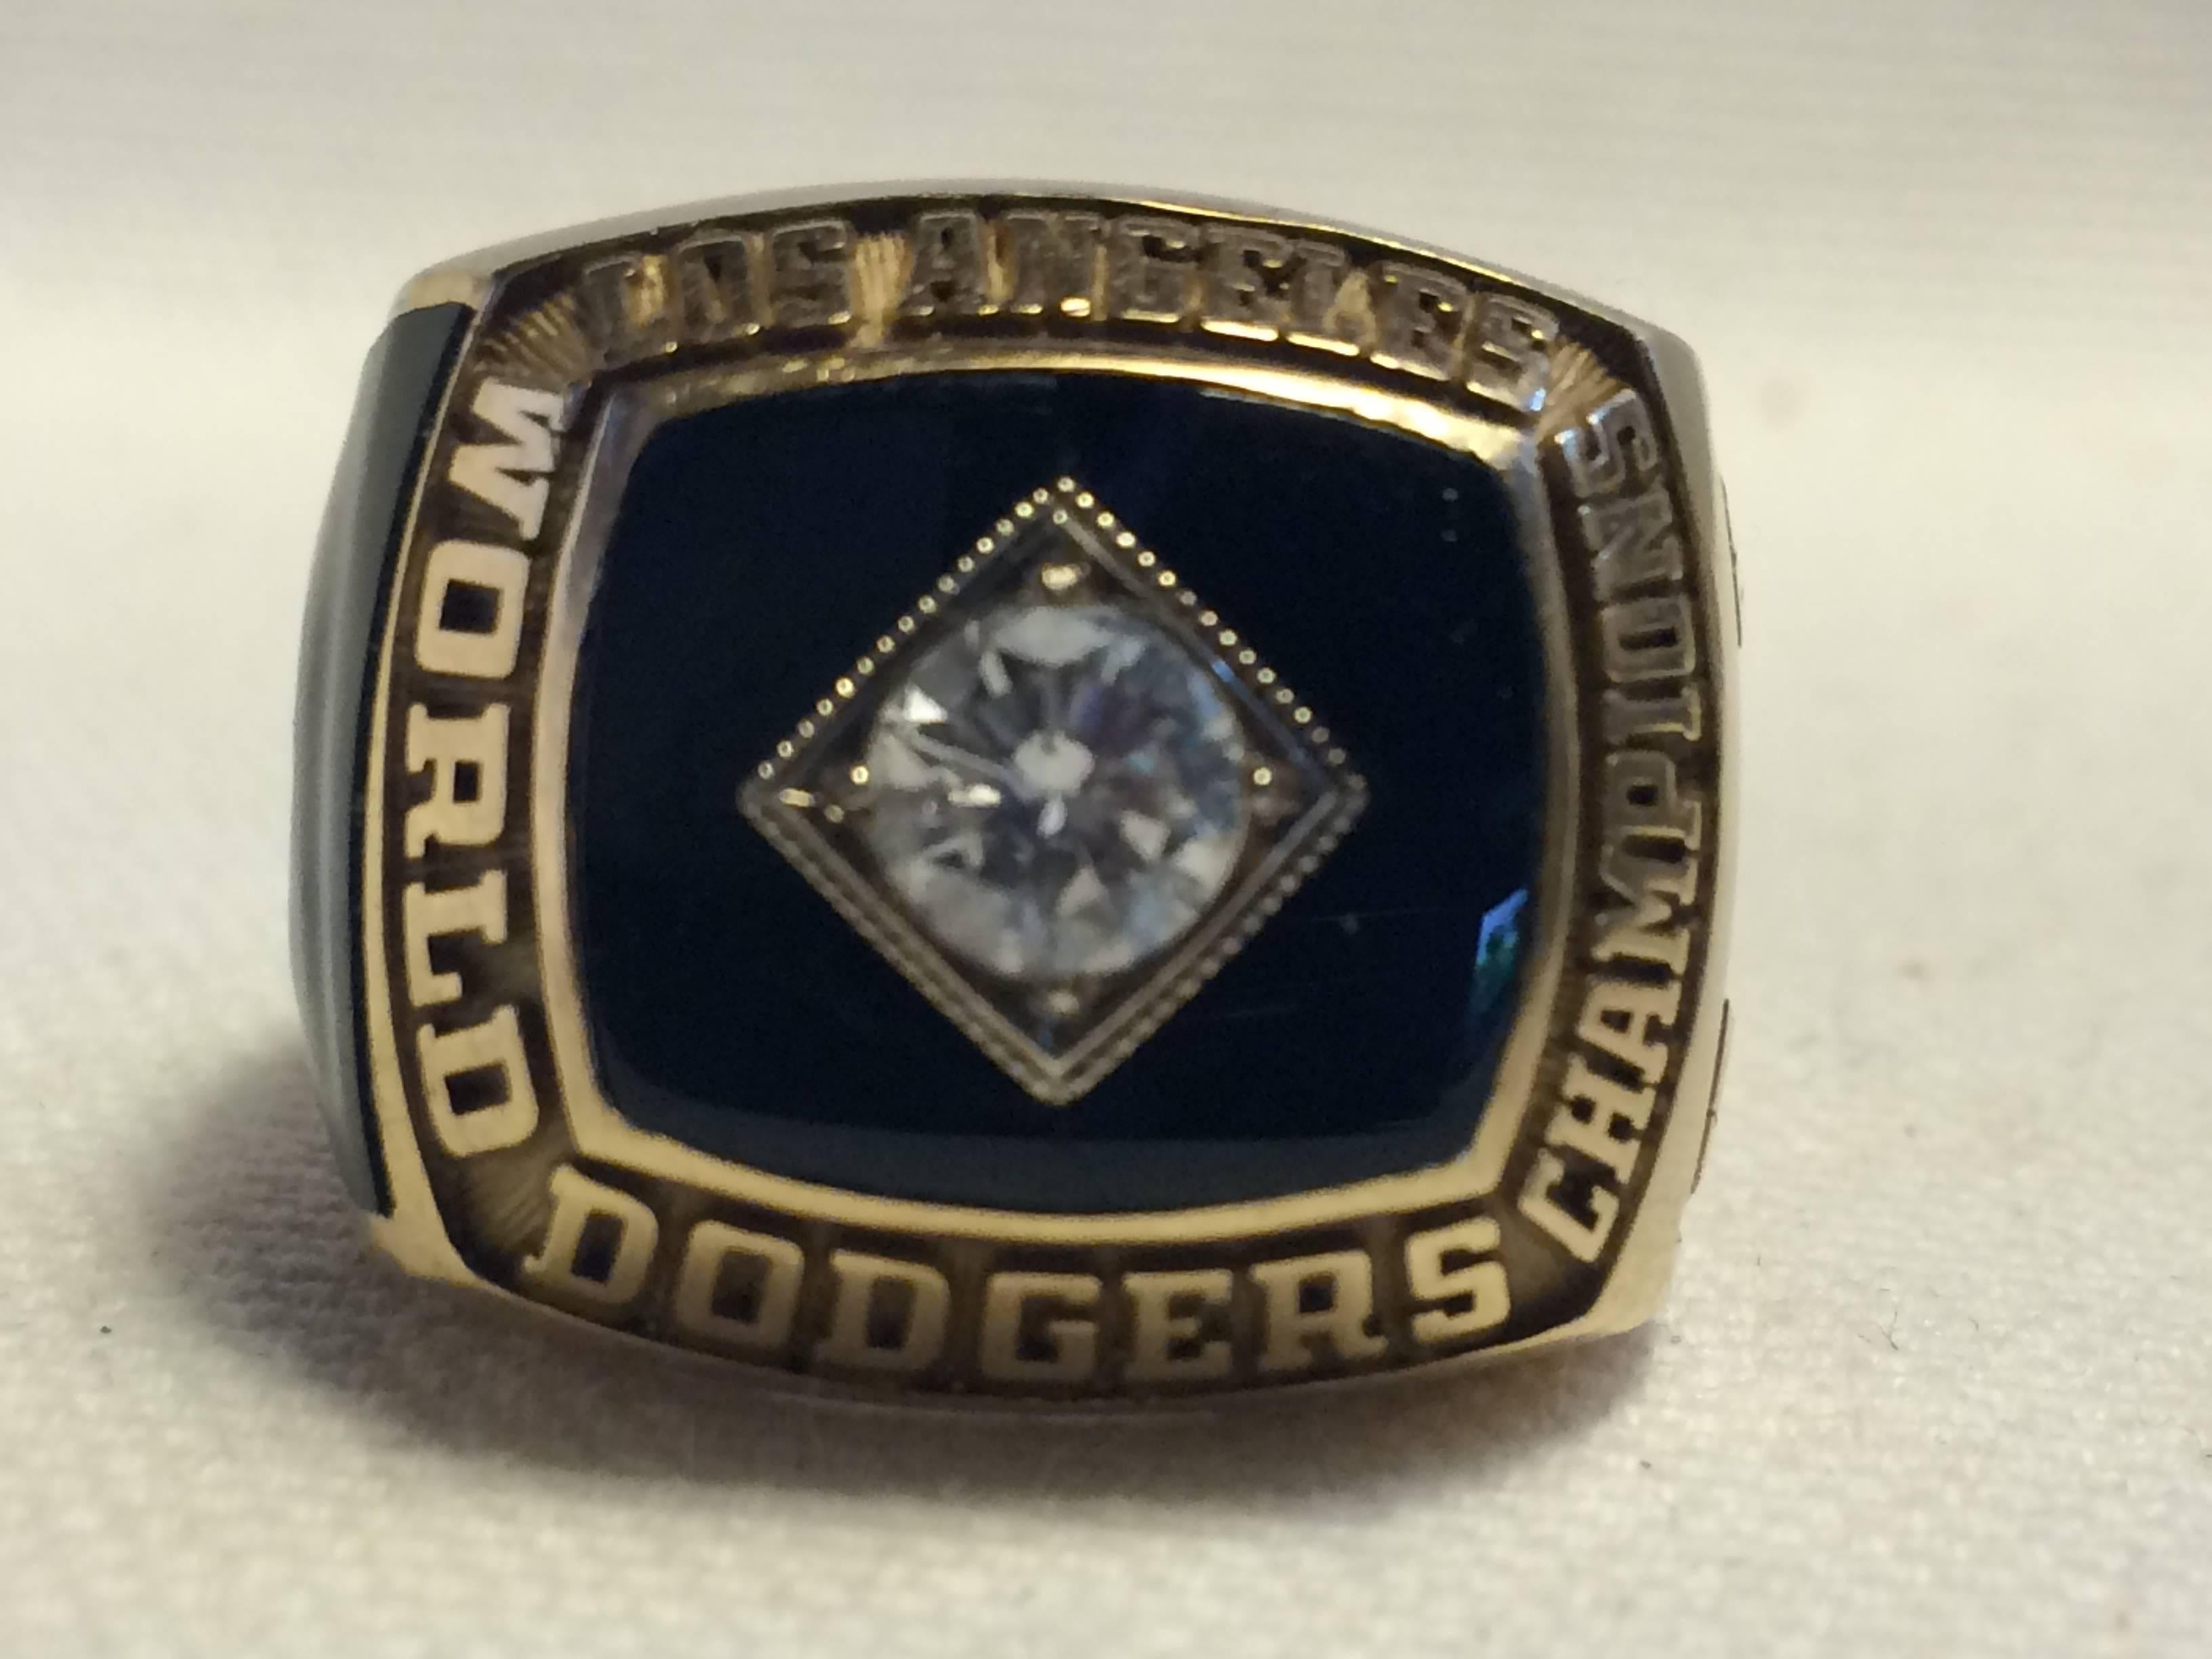 1981 Las Angeles Dodgers World Series Championship ring, made of 14-karat gold, genuine high grade diamond. This ring is an original issue, authentic Staff members ring. Guaranteed authentic. Weight is 29.2 grams of 14k gold, size 10-10.5. This ring